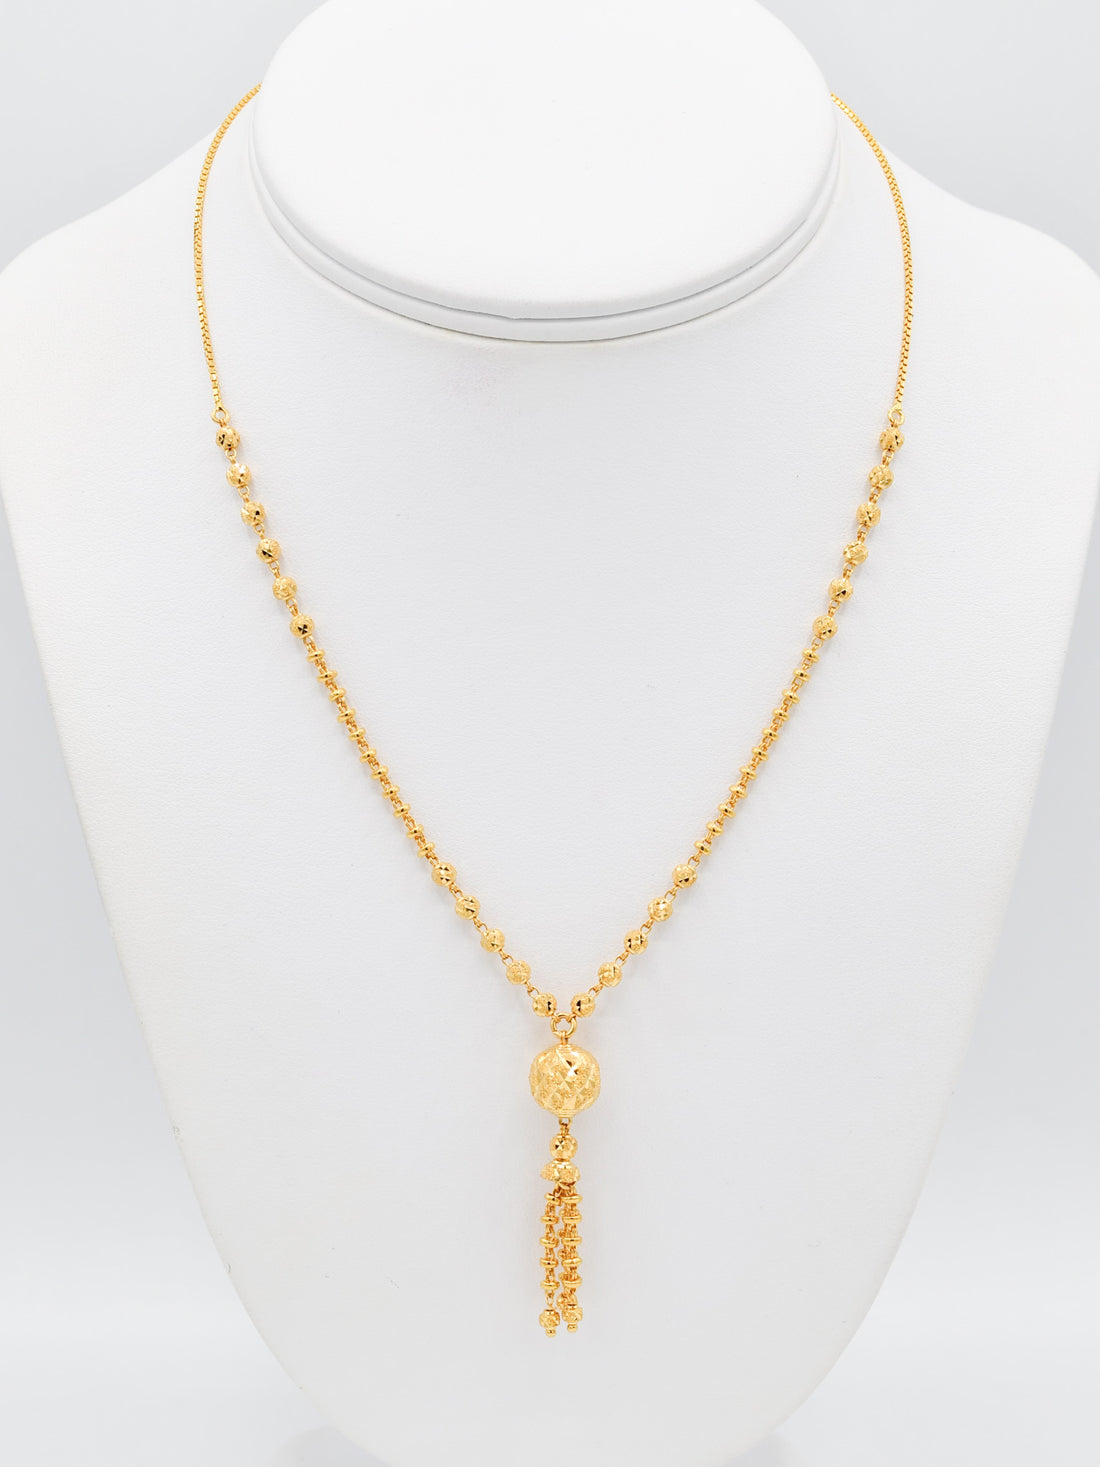 22ct Gold Ball Necklace Set